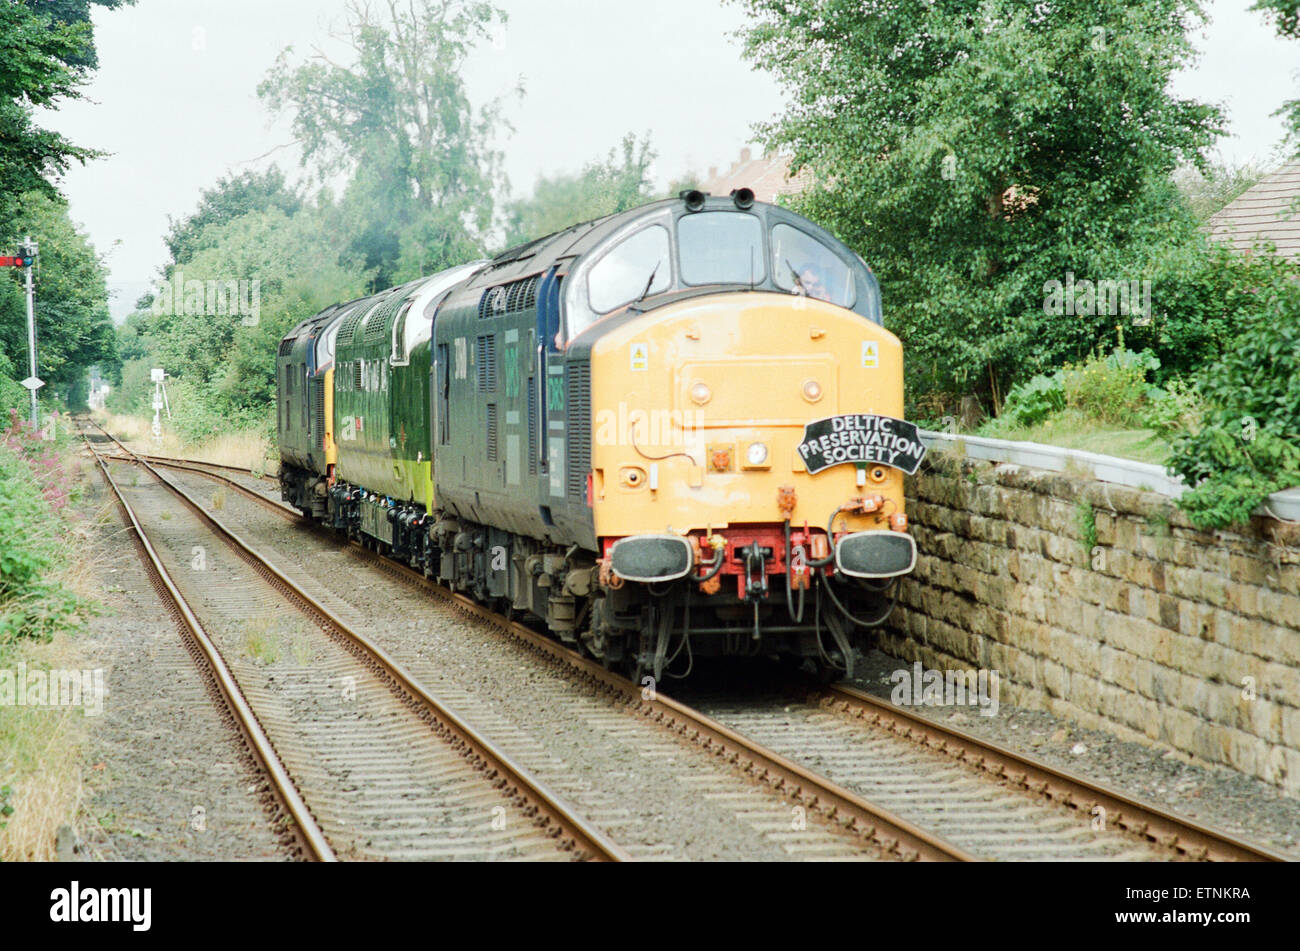 The Deltic Alycidon, D9009 (55 009), Class 55, purchased by the Deltic Preservation Society, leaves ICI Wilton. Pictured at Nunthorpe on route to Grosmont, in the centre of two Class 37 engines. 28th August 1998. Stock Photo